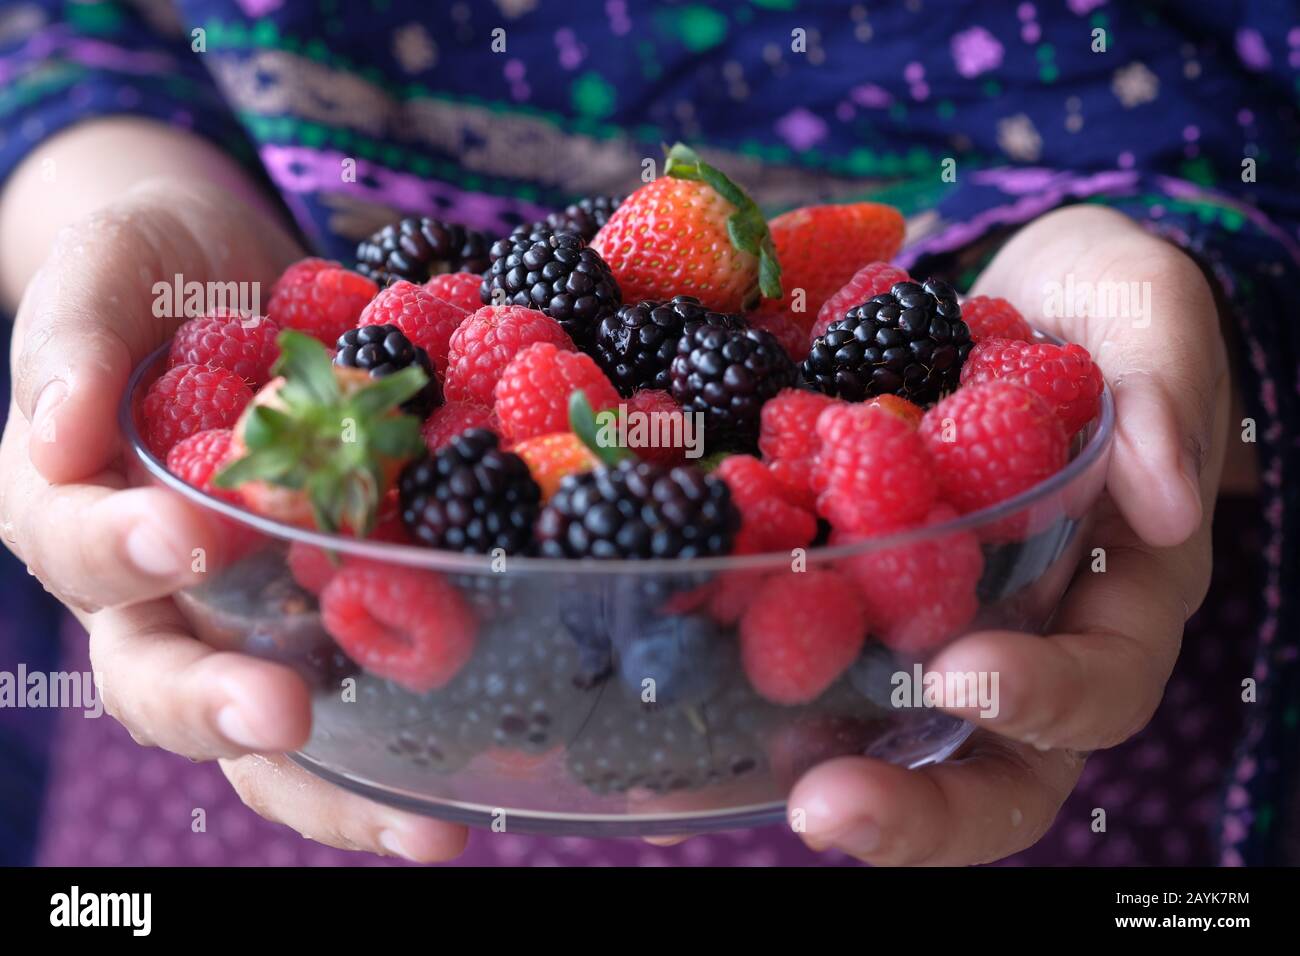 close up of fresh berry fruit in a bowl,  Stock Photo